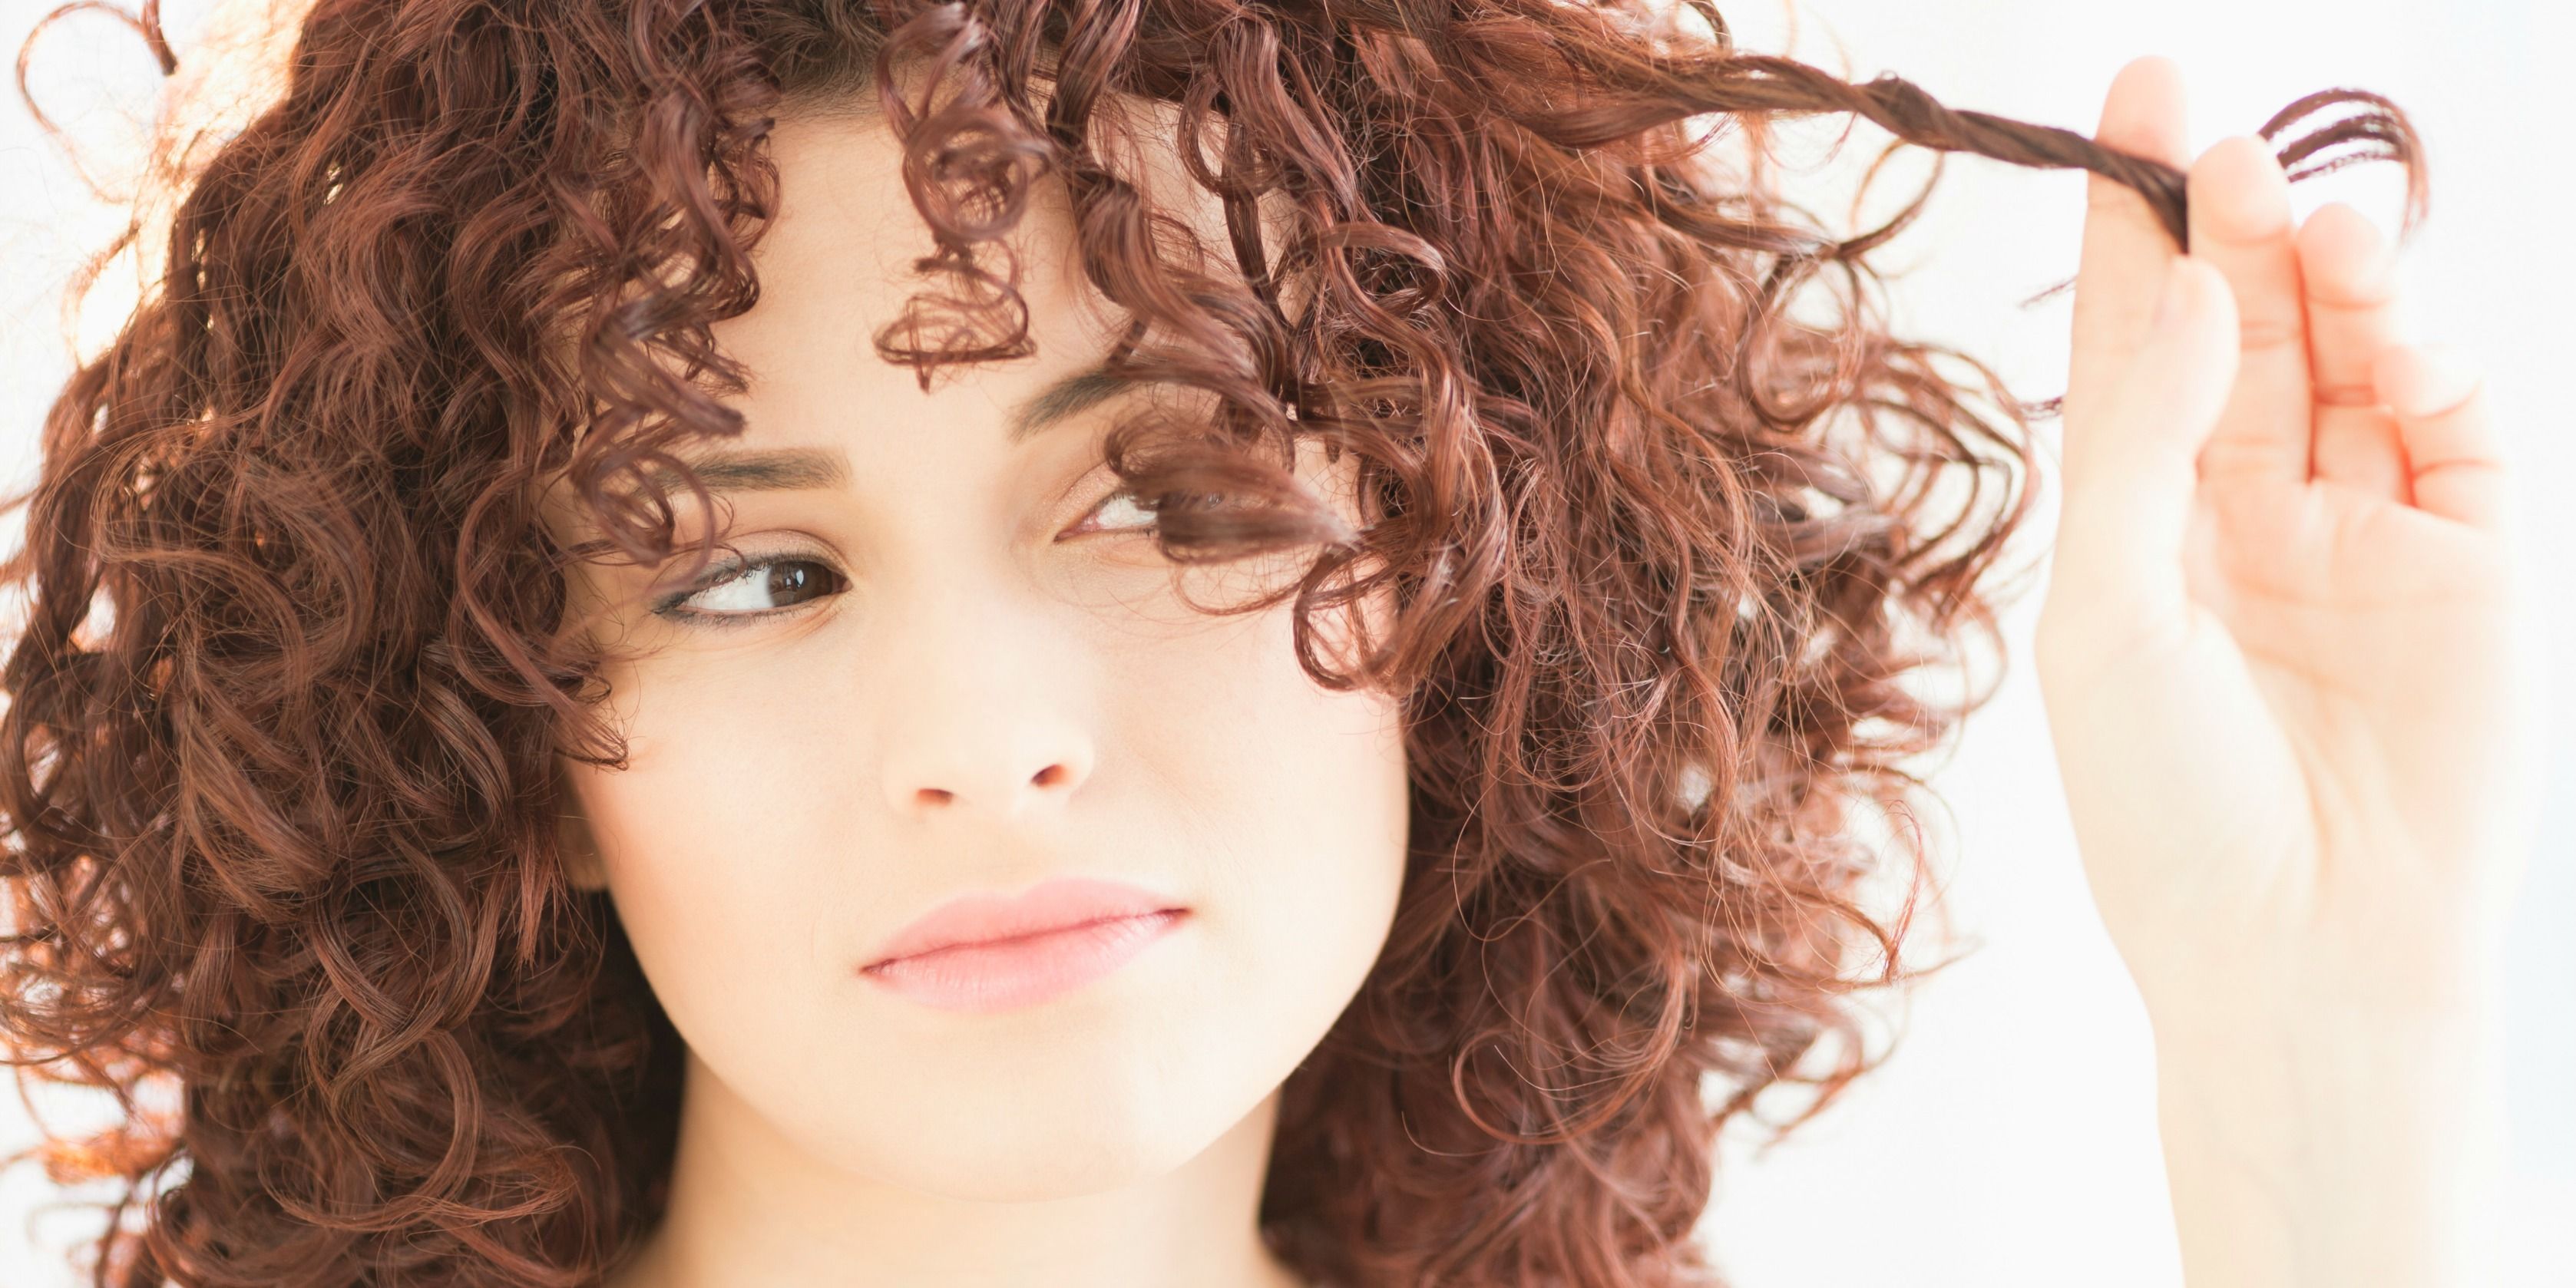 How To Grow Curly Hair Tips For Getting Long Curly Hair